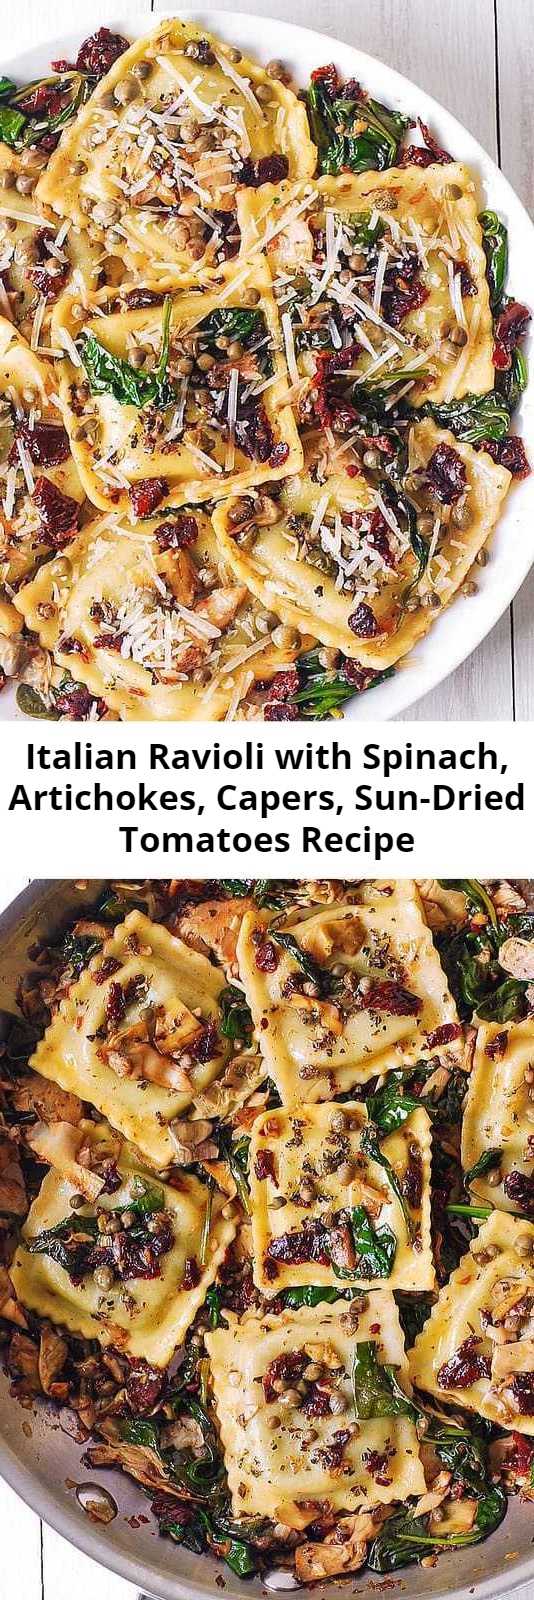 Italian Ravioli with Spinach, Artichokes, Capers, Sun-Dried Tomatoes Recipe - Italian Ravioli with Spinach, Artichokes, Capers, Sun-Dried Tomatoes. The vegetables are sautéed in garlic and olive oil. Meatless, refreshing, Mediterranean style pasta recipe that doesn't need any meat - this meal will keep you full!